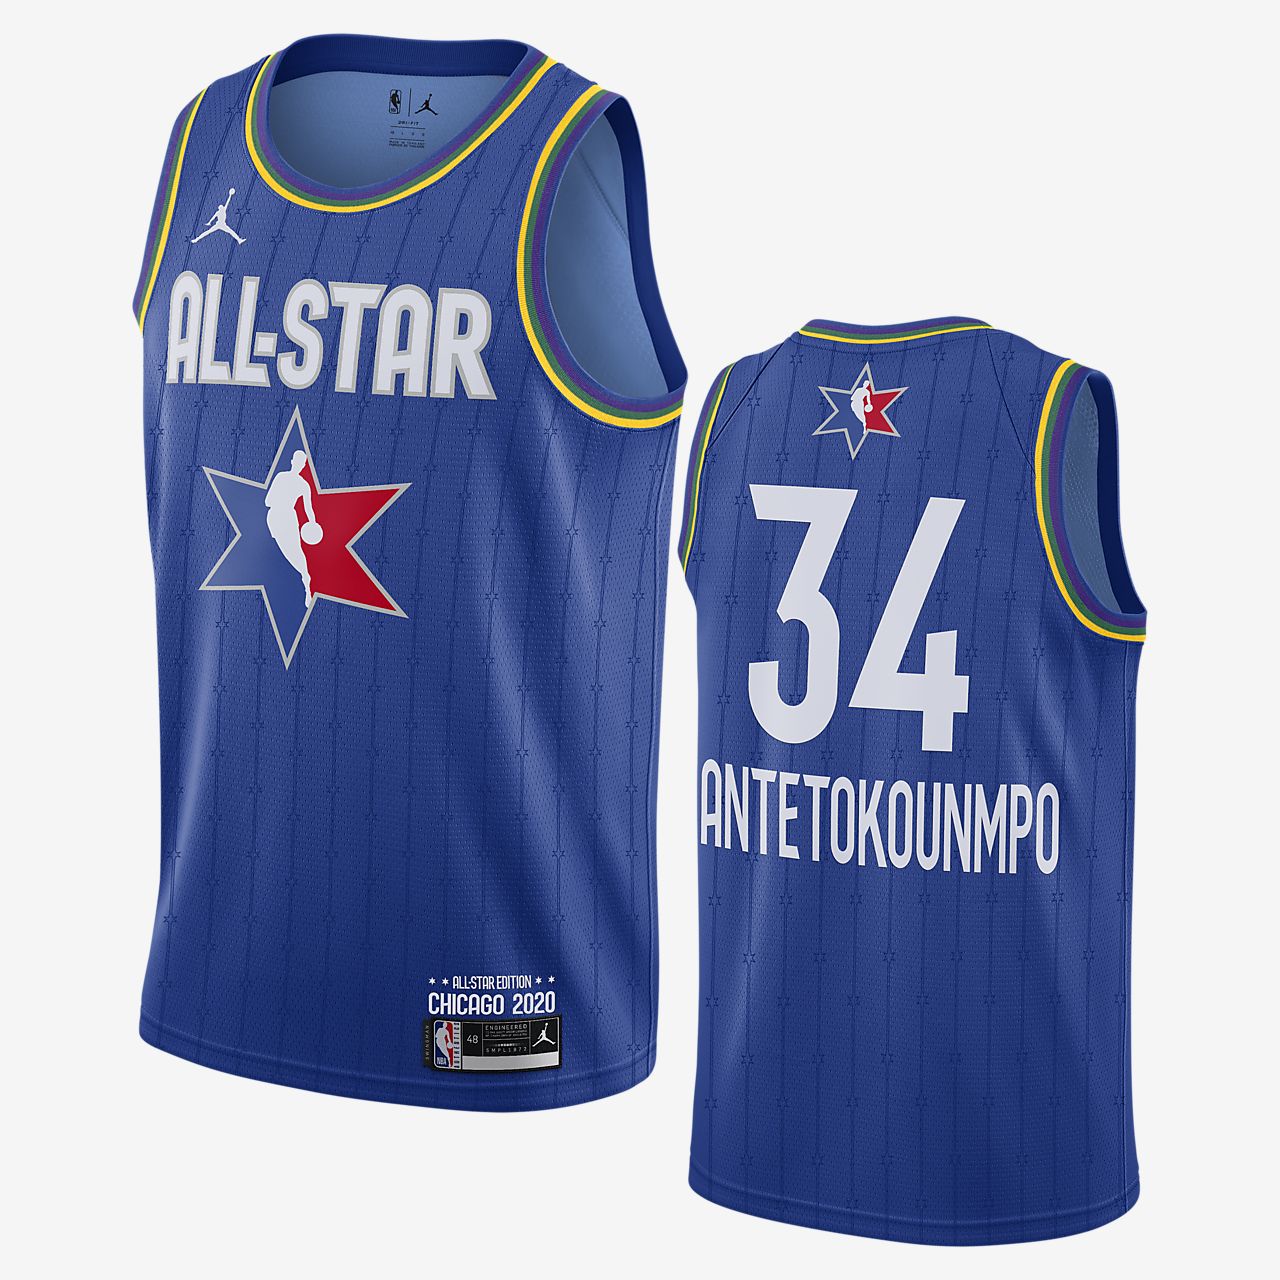 giannis jersey all star